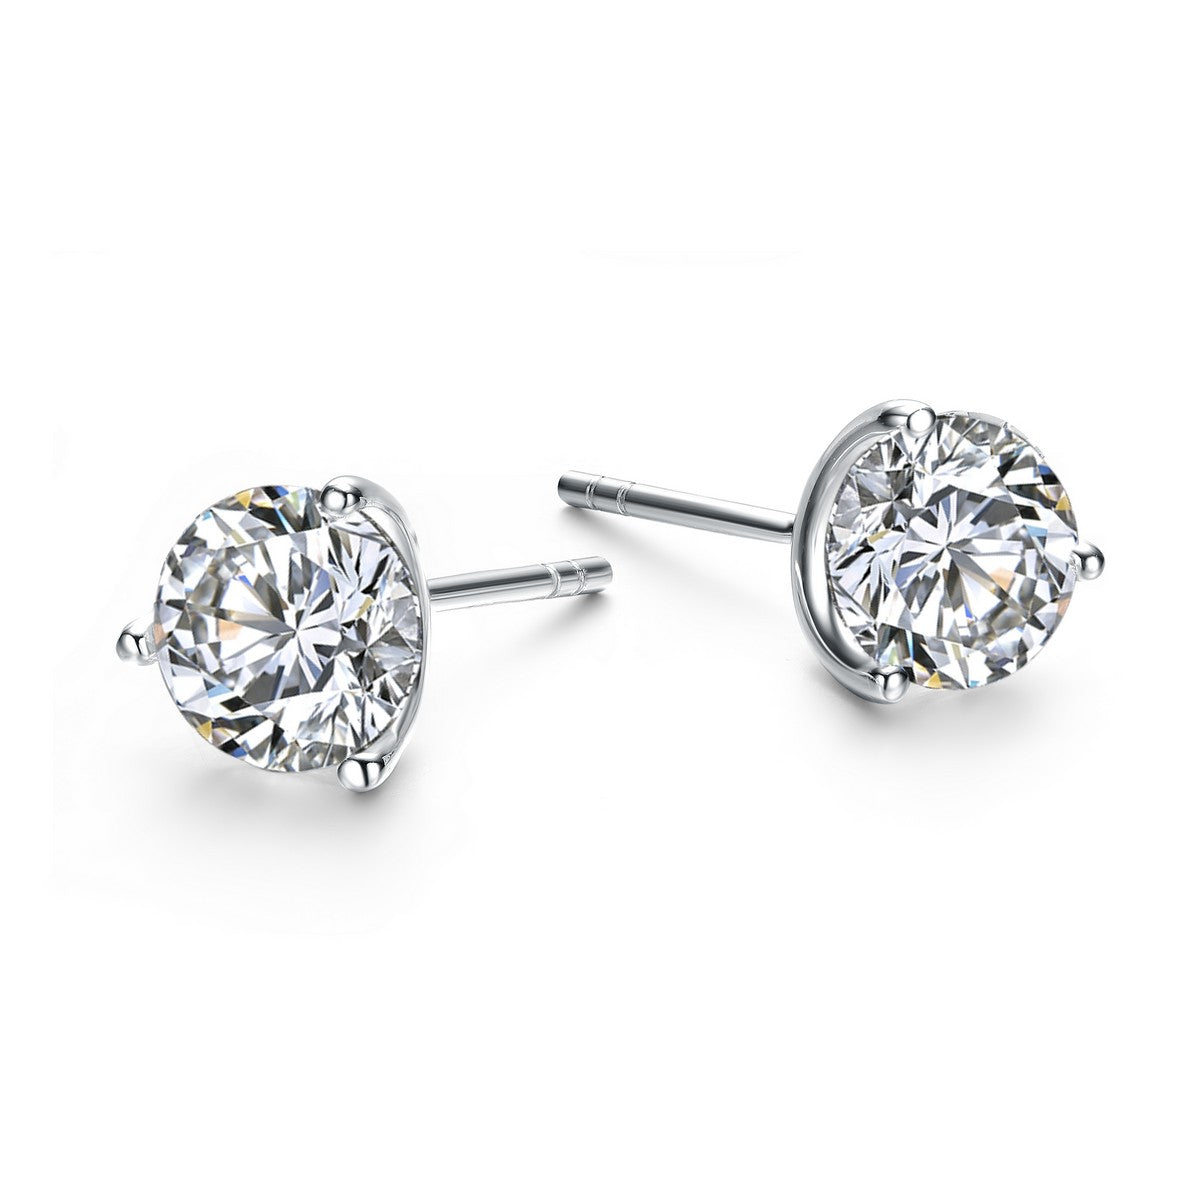 Women’s White / Silver Triomphe Trinité Solitaire Stud Earrings Genevive Jewelry